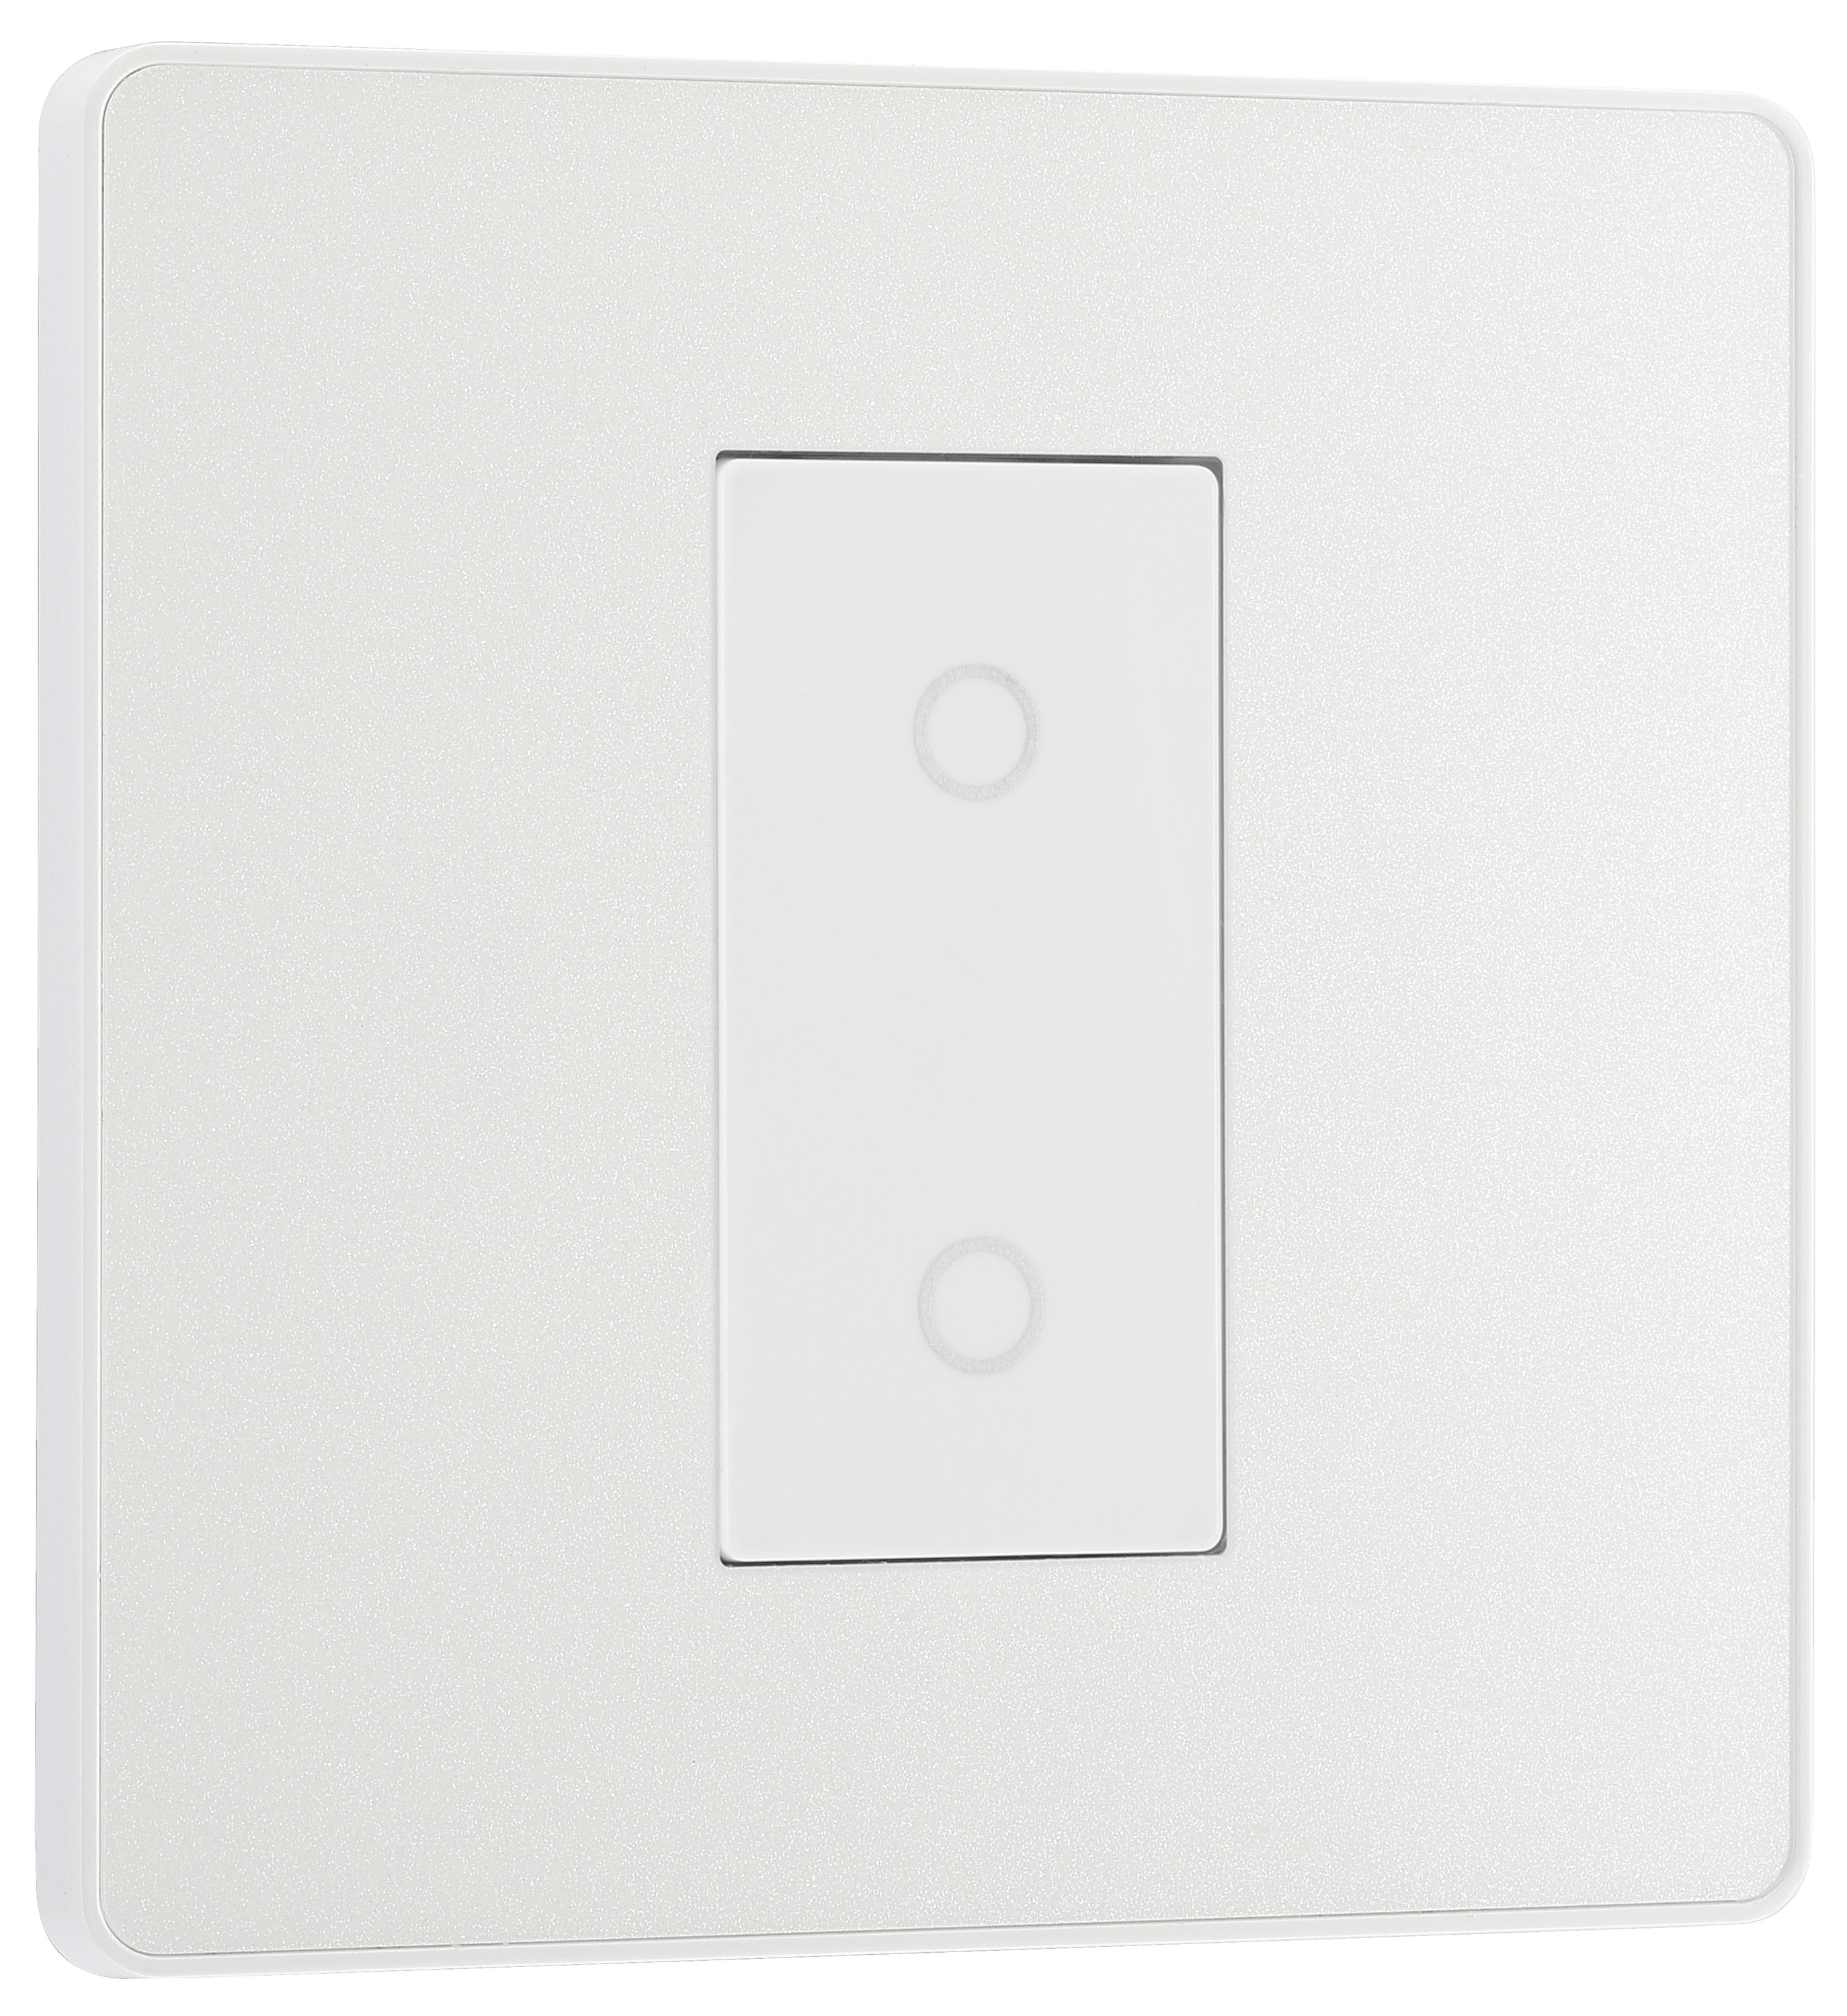 Image of BG Evolve Pearlescent White 2 Way Secondary Single Touch Dimmer Switch - 200W